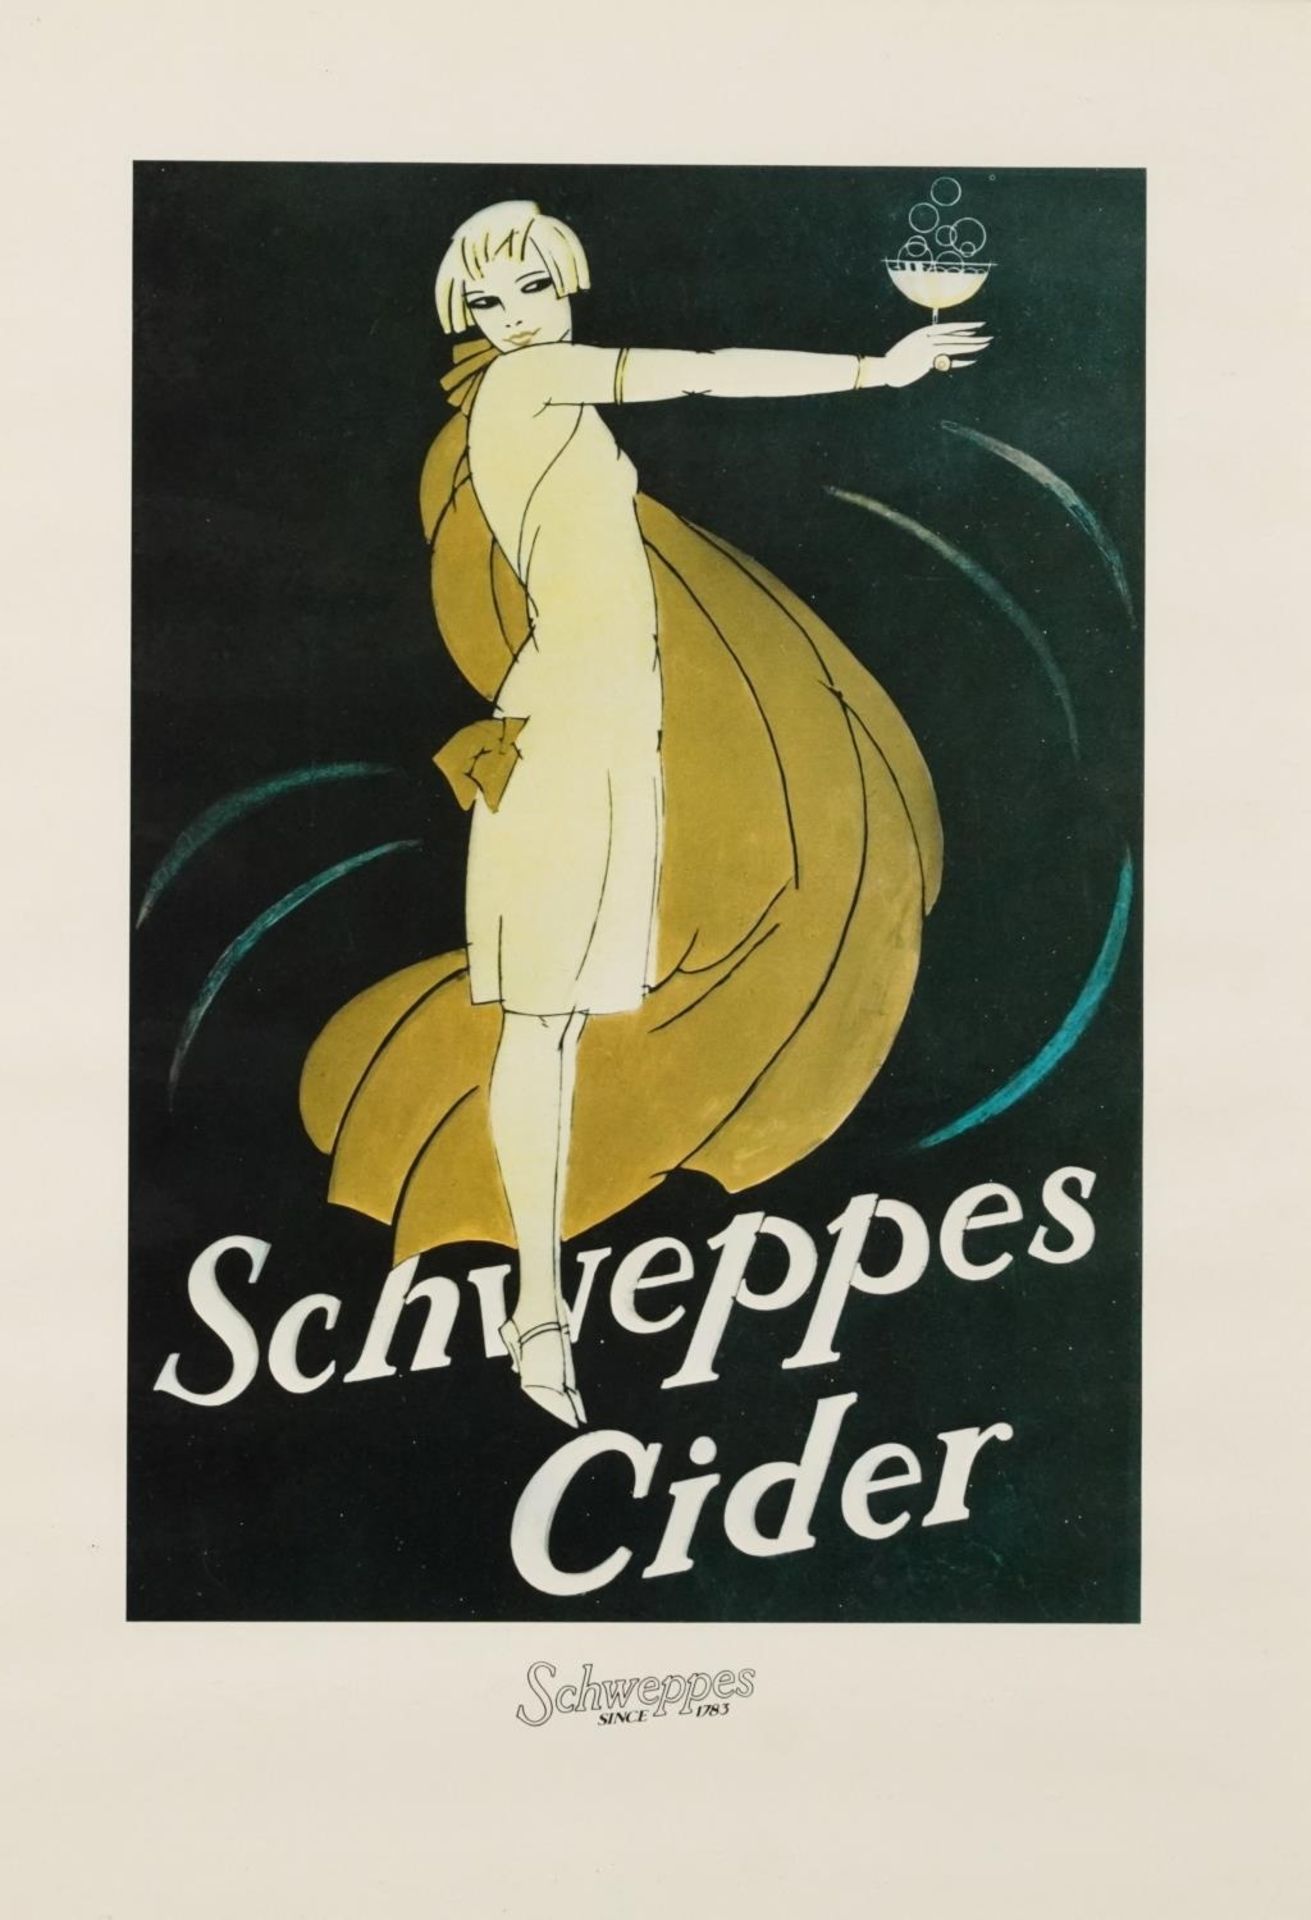 Schweppes, Cider, Tonic Water, Ginger Ale and Lemon Squash, set of six posters, framed and glazed, - Image 6 of 20